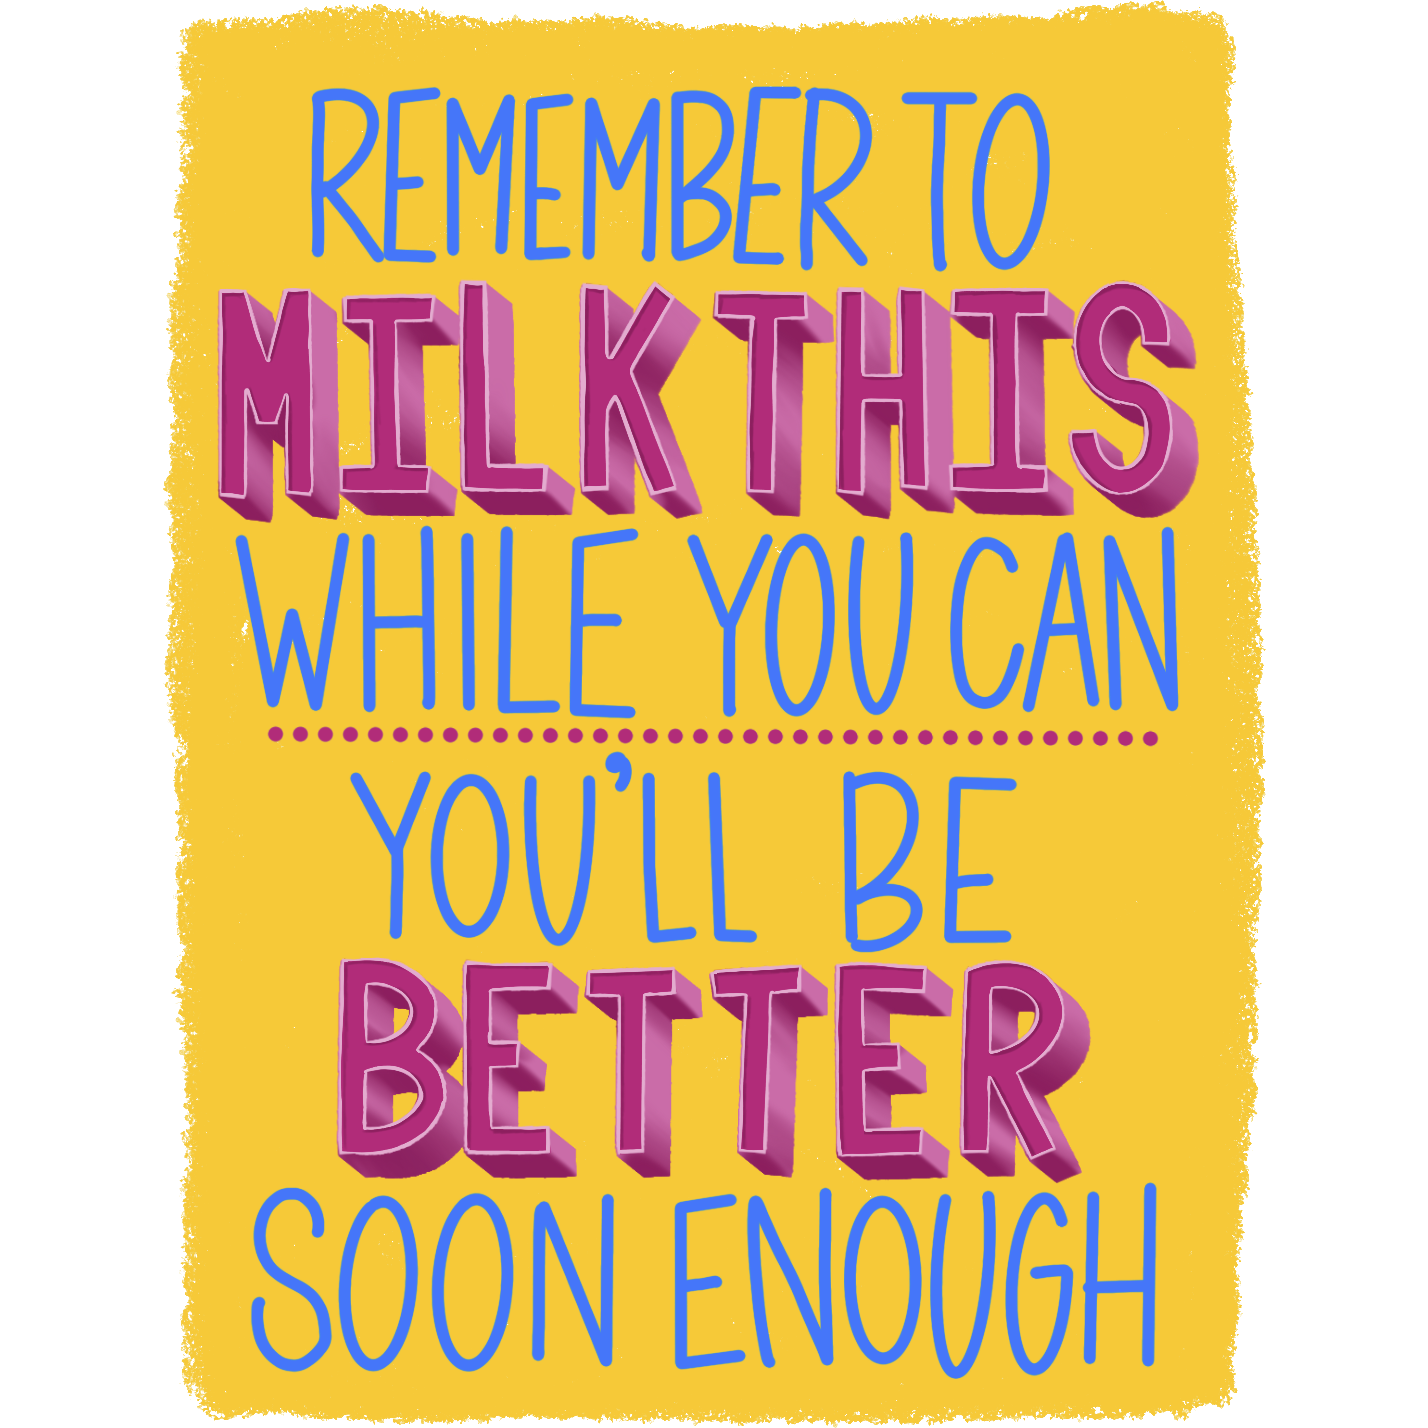 Remember to Milk This While You Can, You'll Be Better Soon Enough - Get Well Card | Sick, Funny card